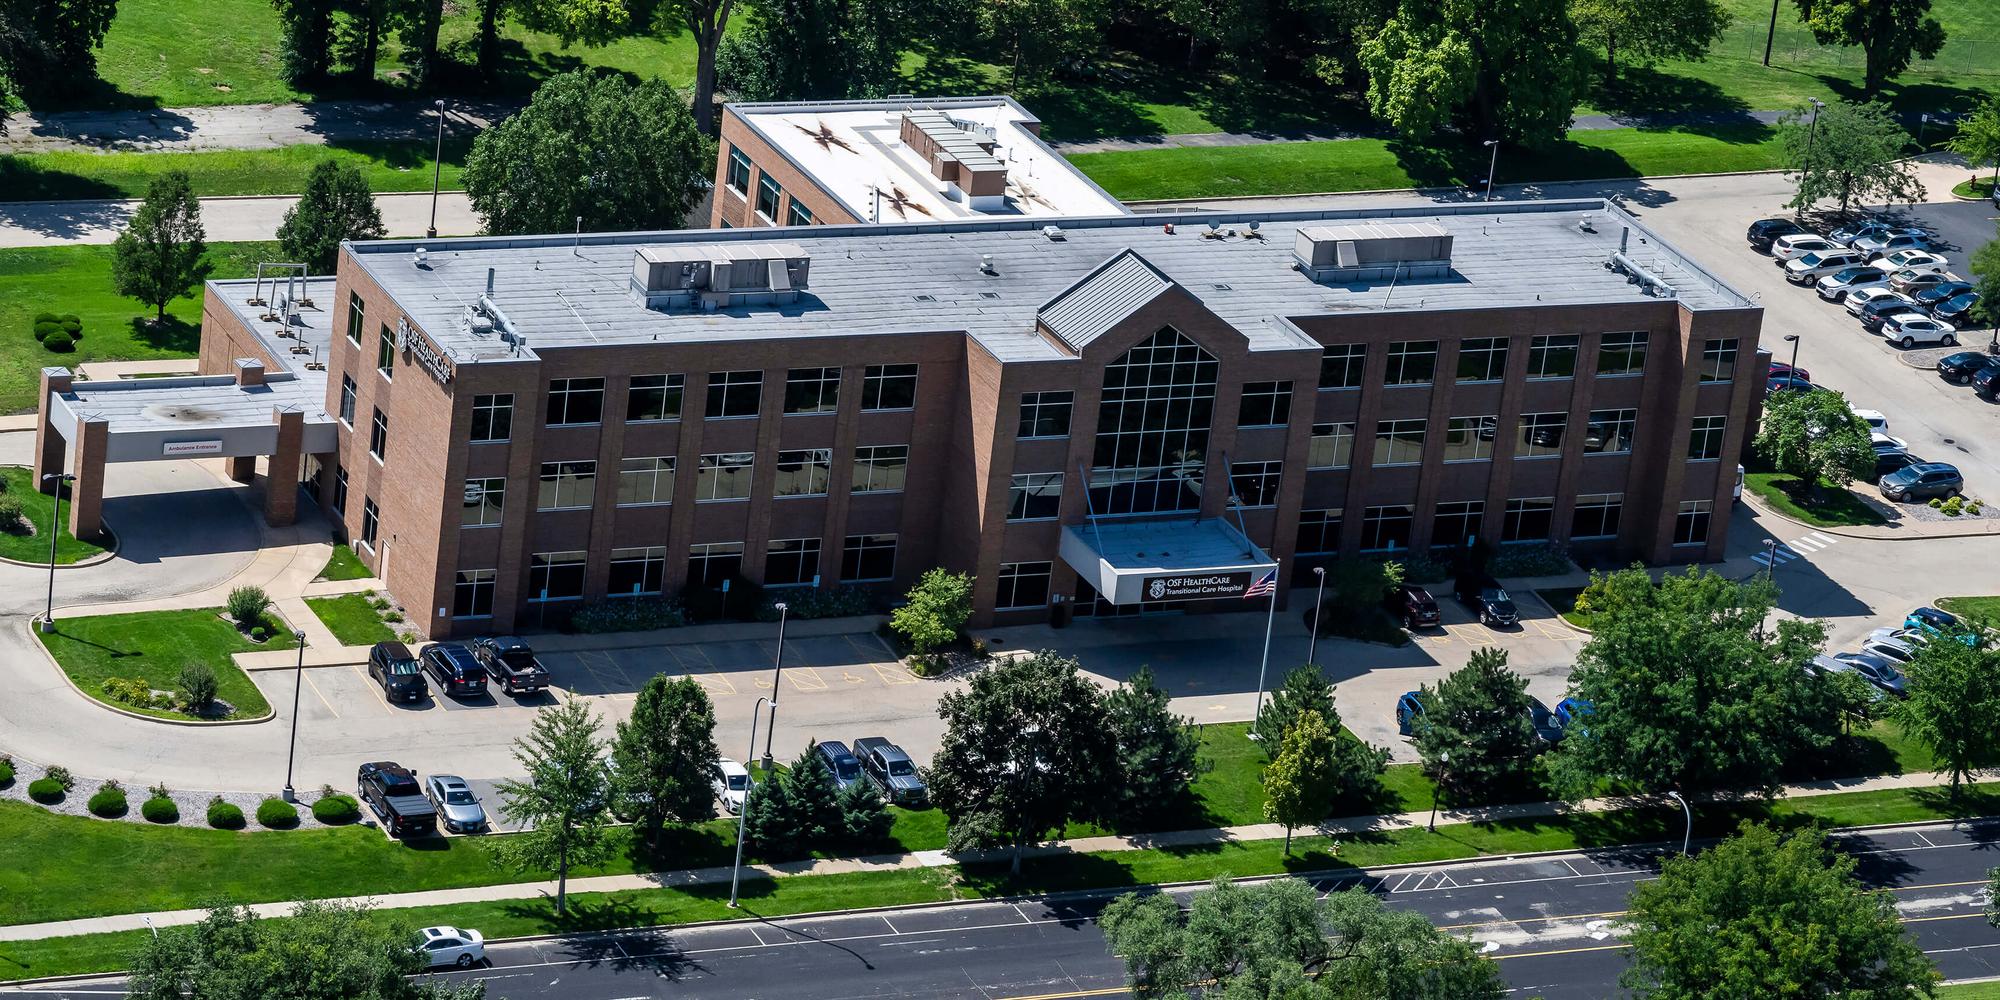 Transitional Care Hospital Building Aerial